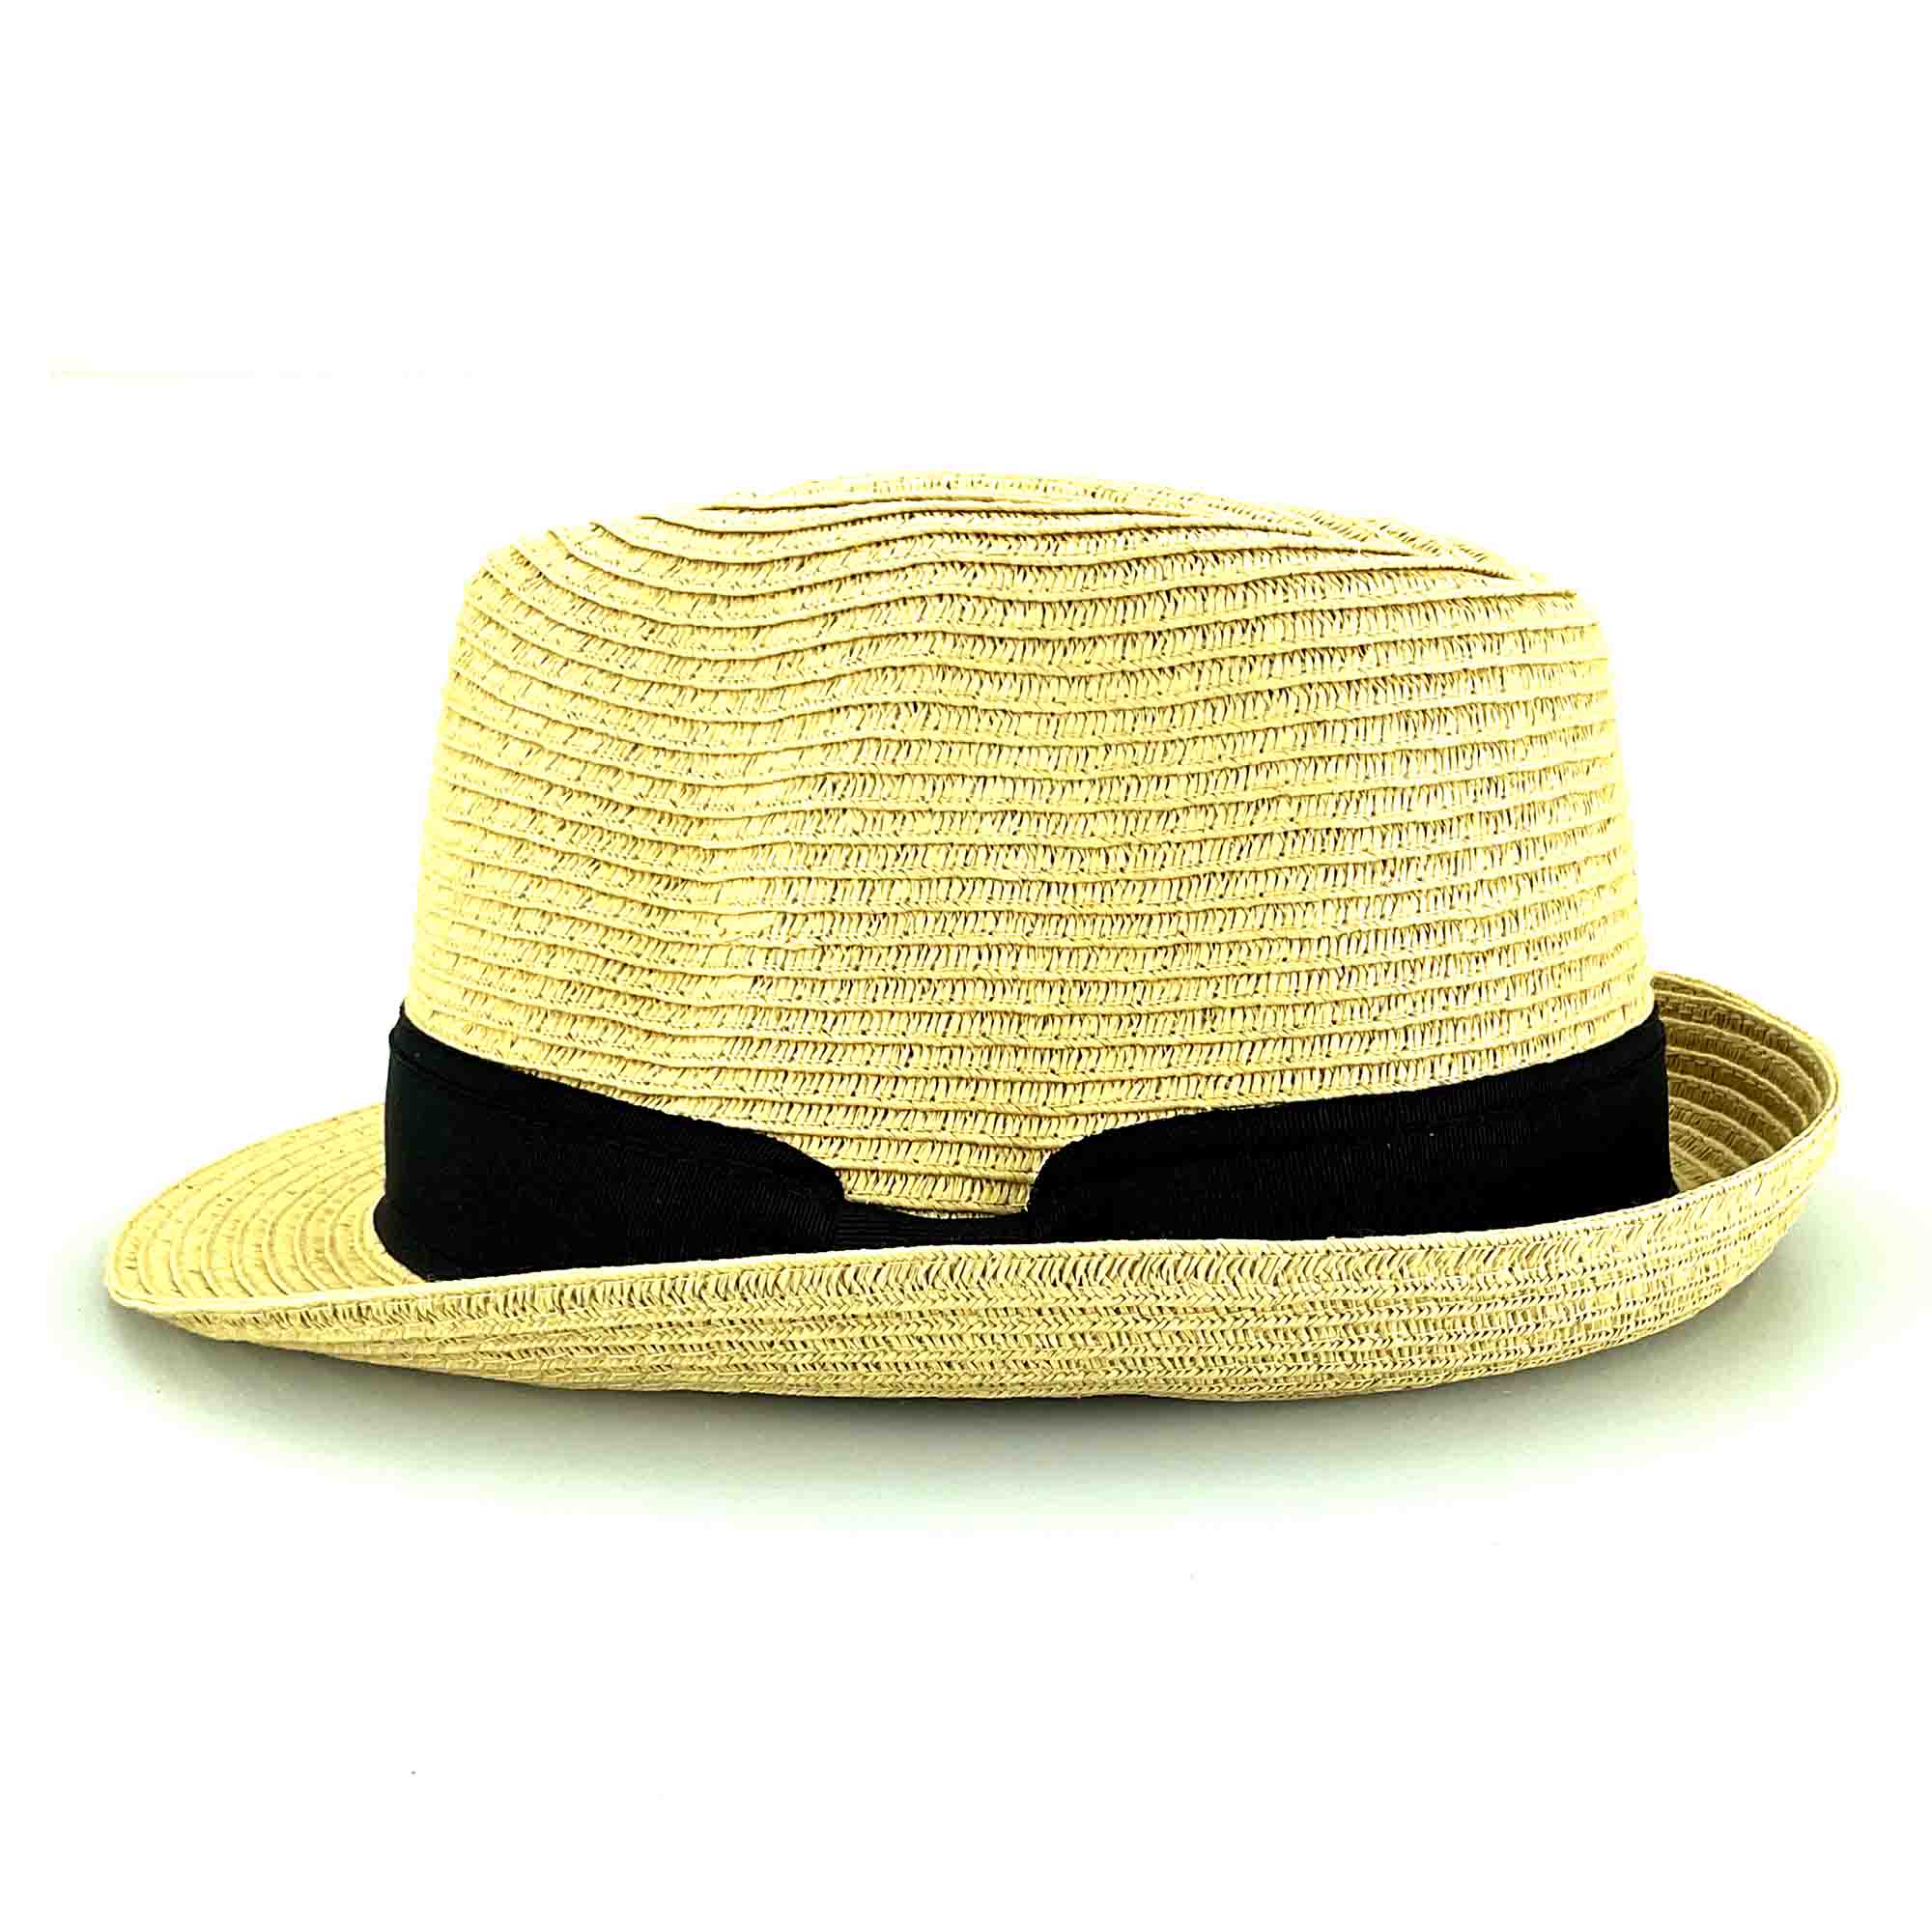 Petite Straw Fedora Hat with Black Band - Jeanne Simmons Hats, Fedora Hat - SetarTrading Hats 